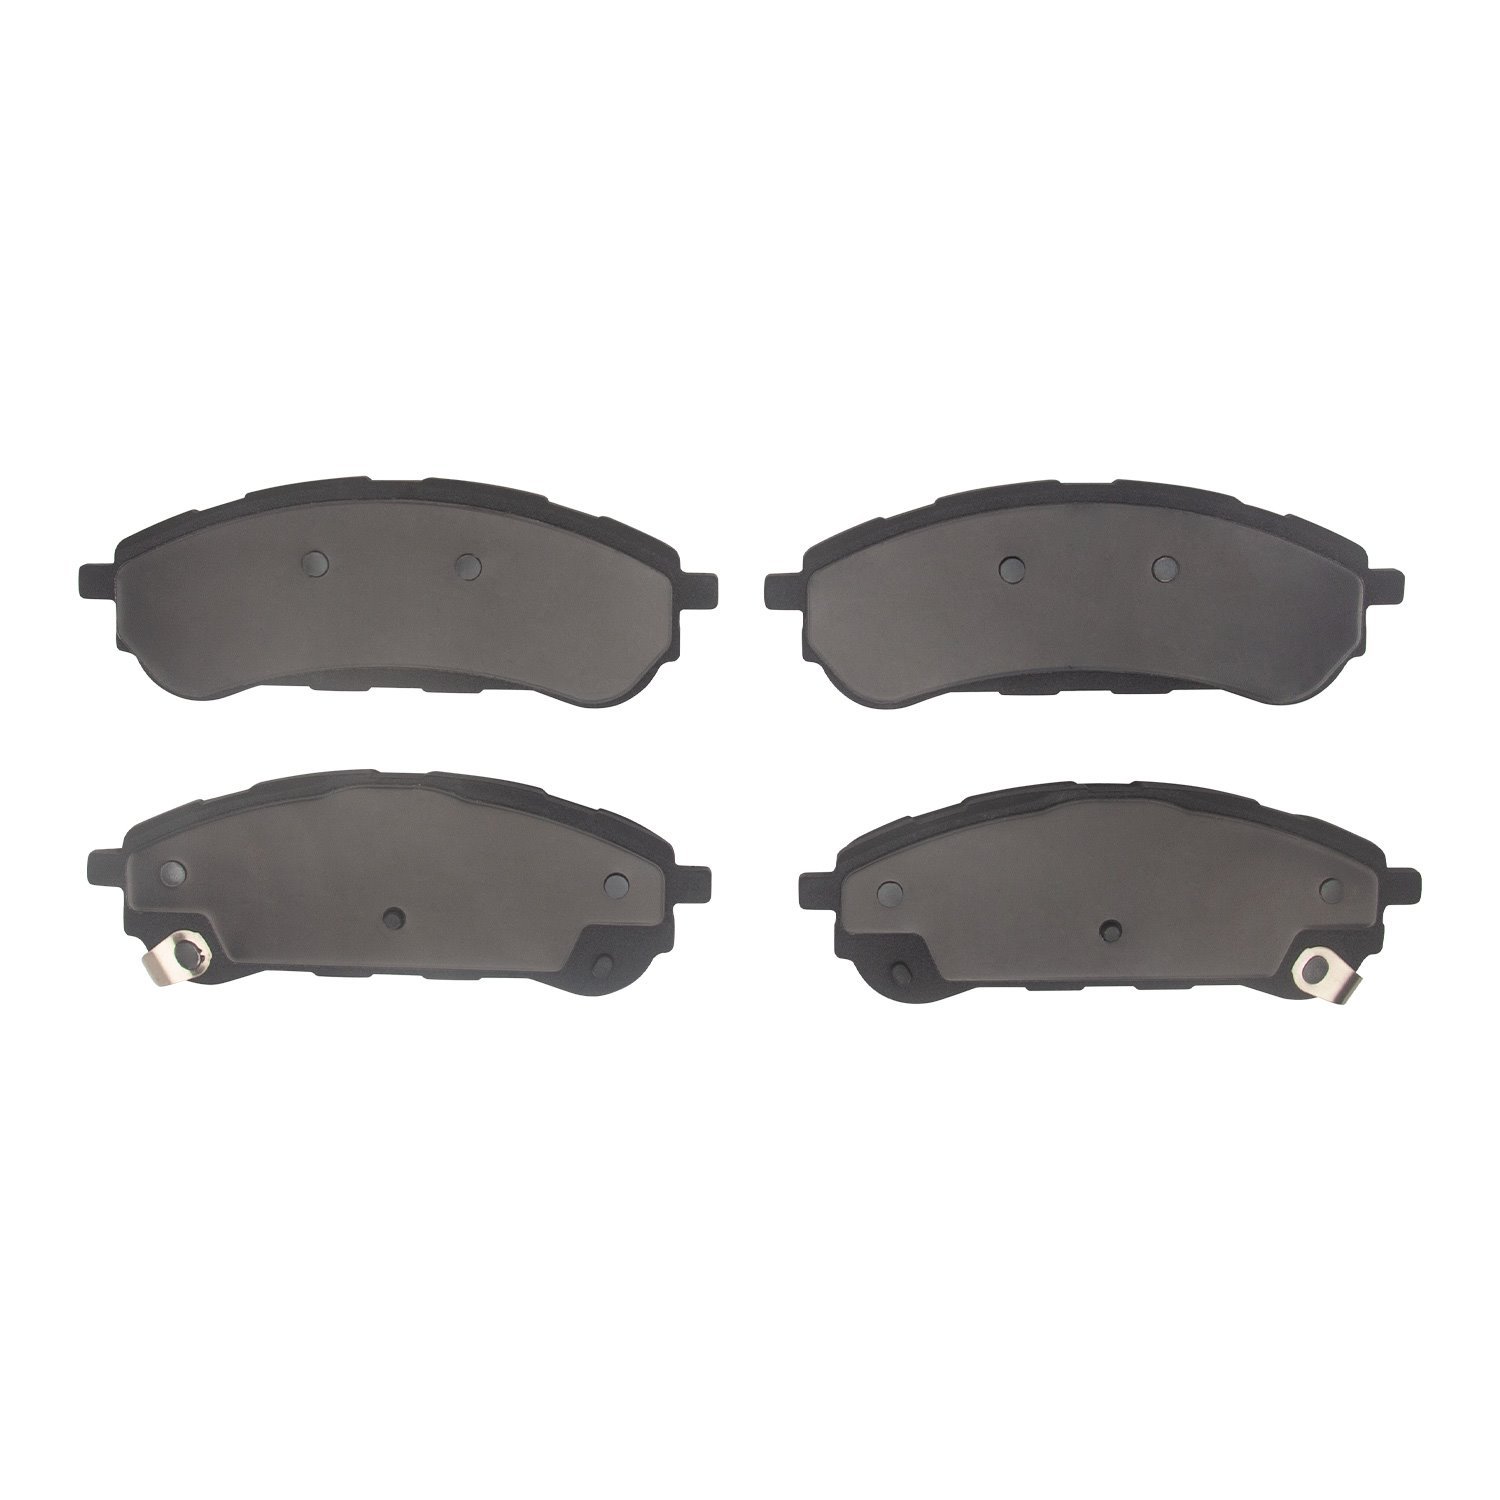 1310-2208-00 3000-Series Ceramic Brake Pads, Fits Select Ford/Lincoln/Mercury/Mazda, Position: Rear